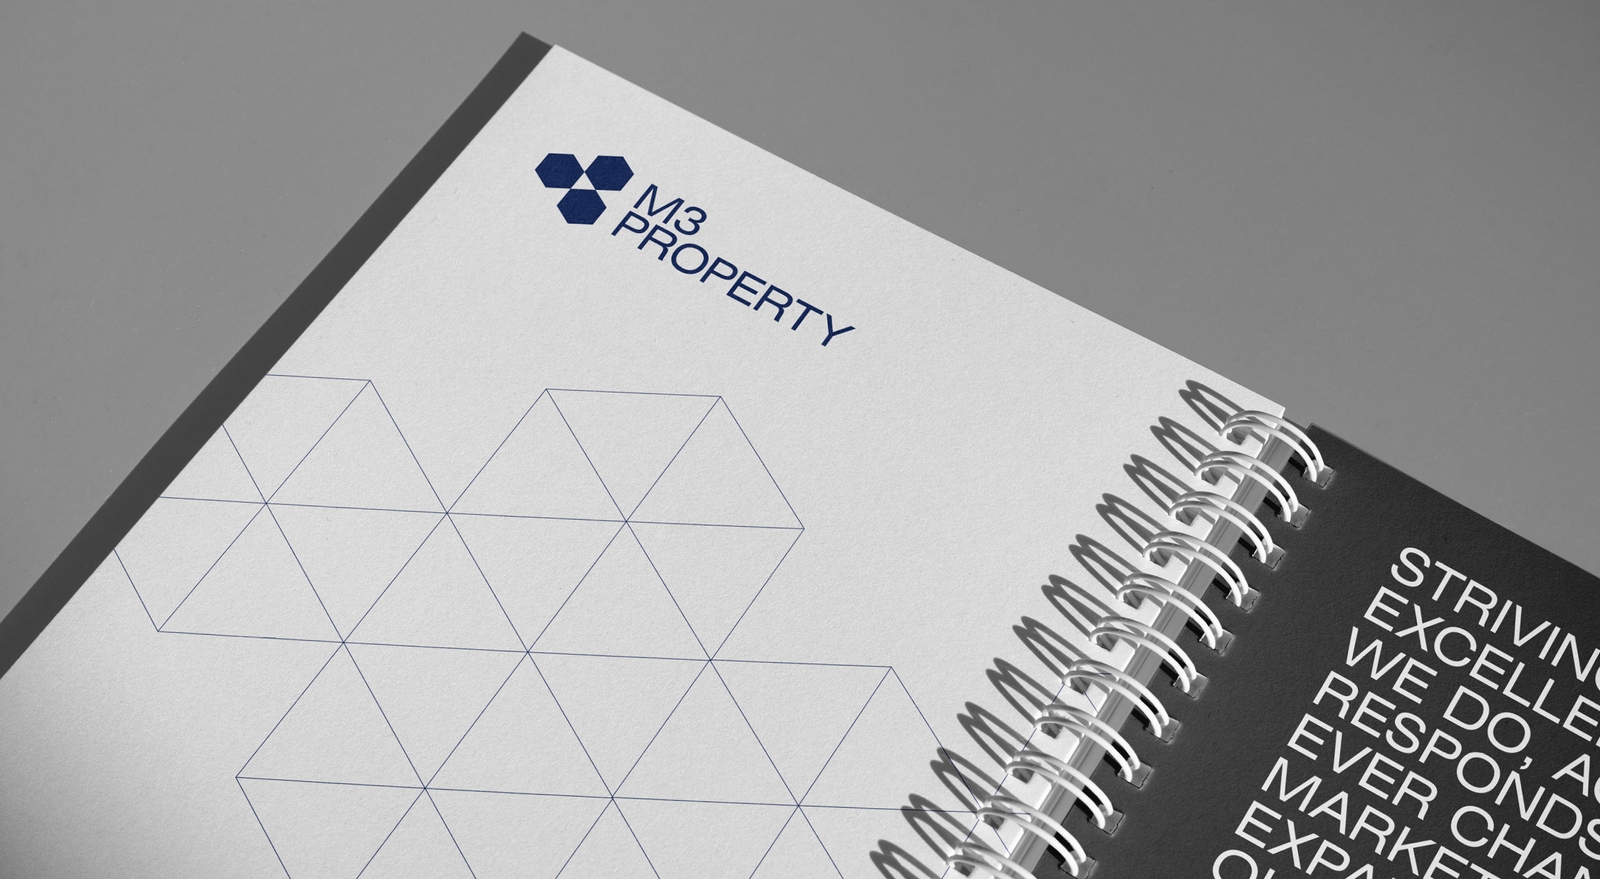 M3 Property - Brand and Website - Ring Bound Notepad Design | Atollon - a design company